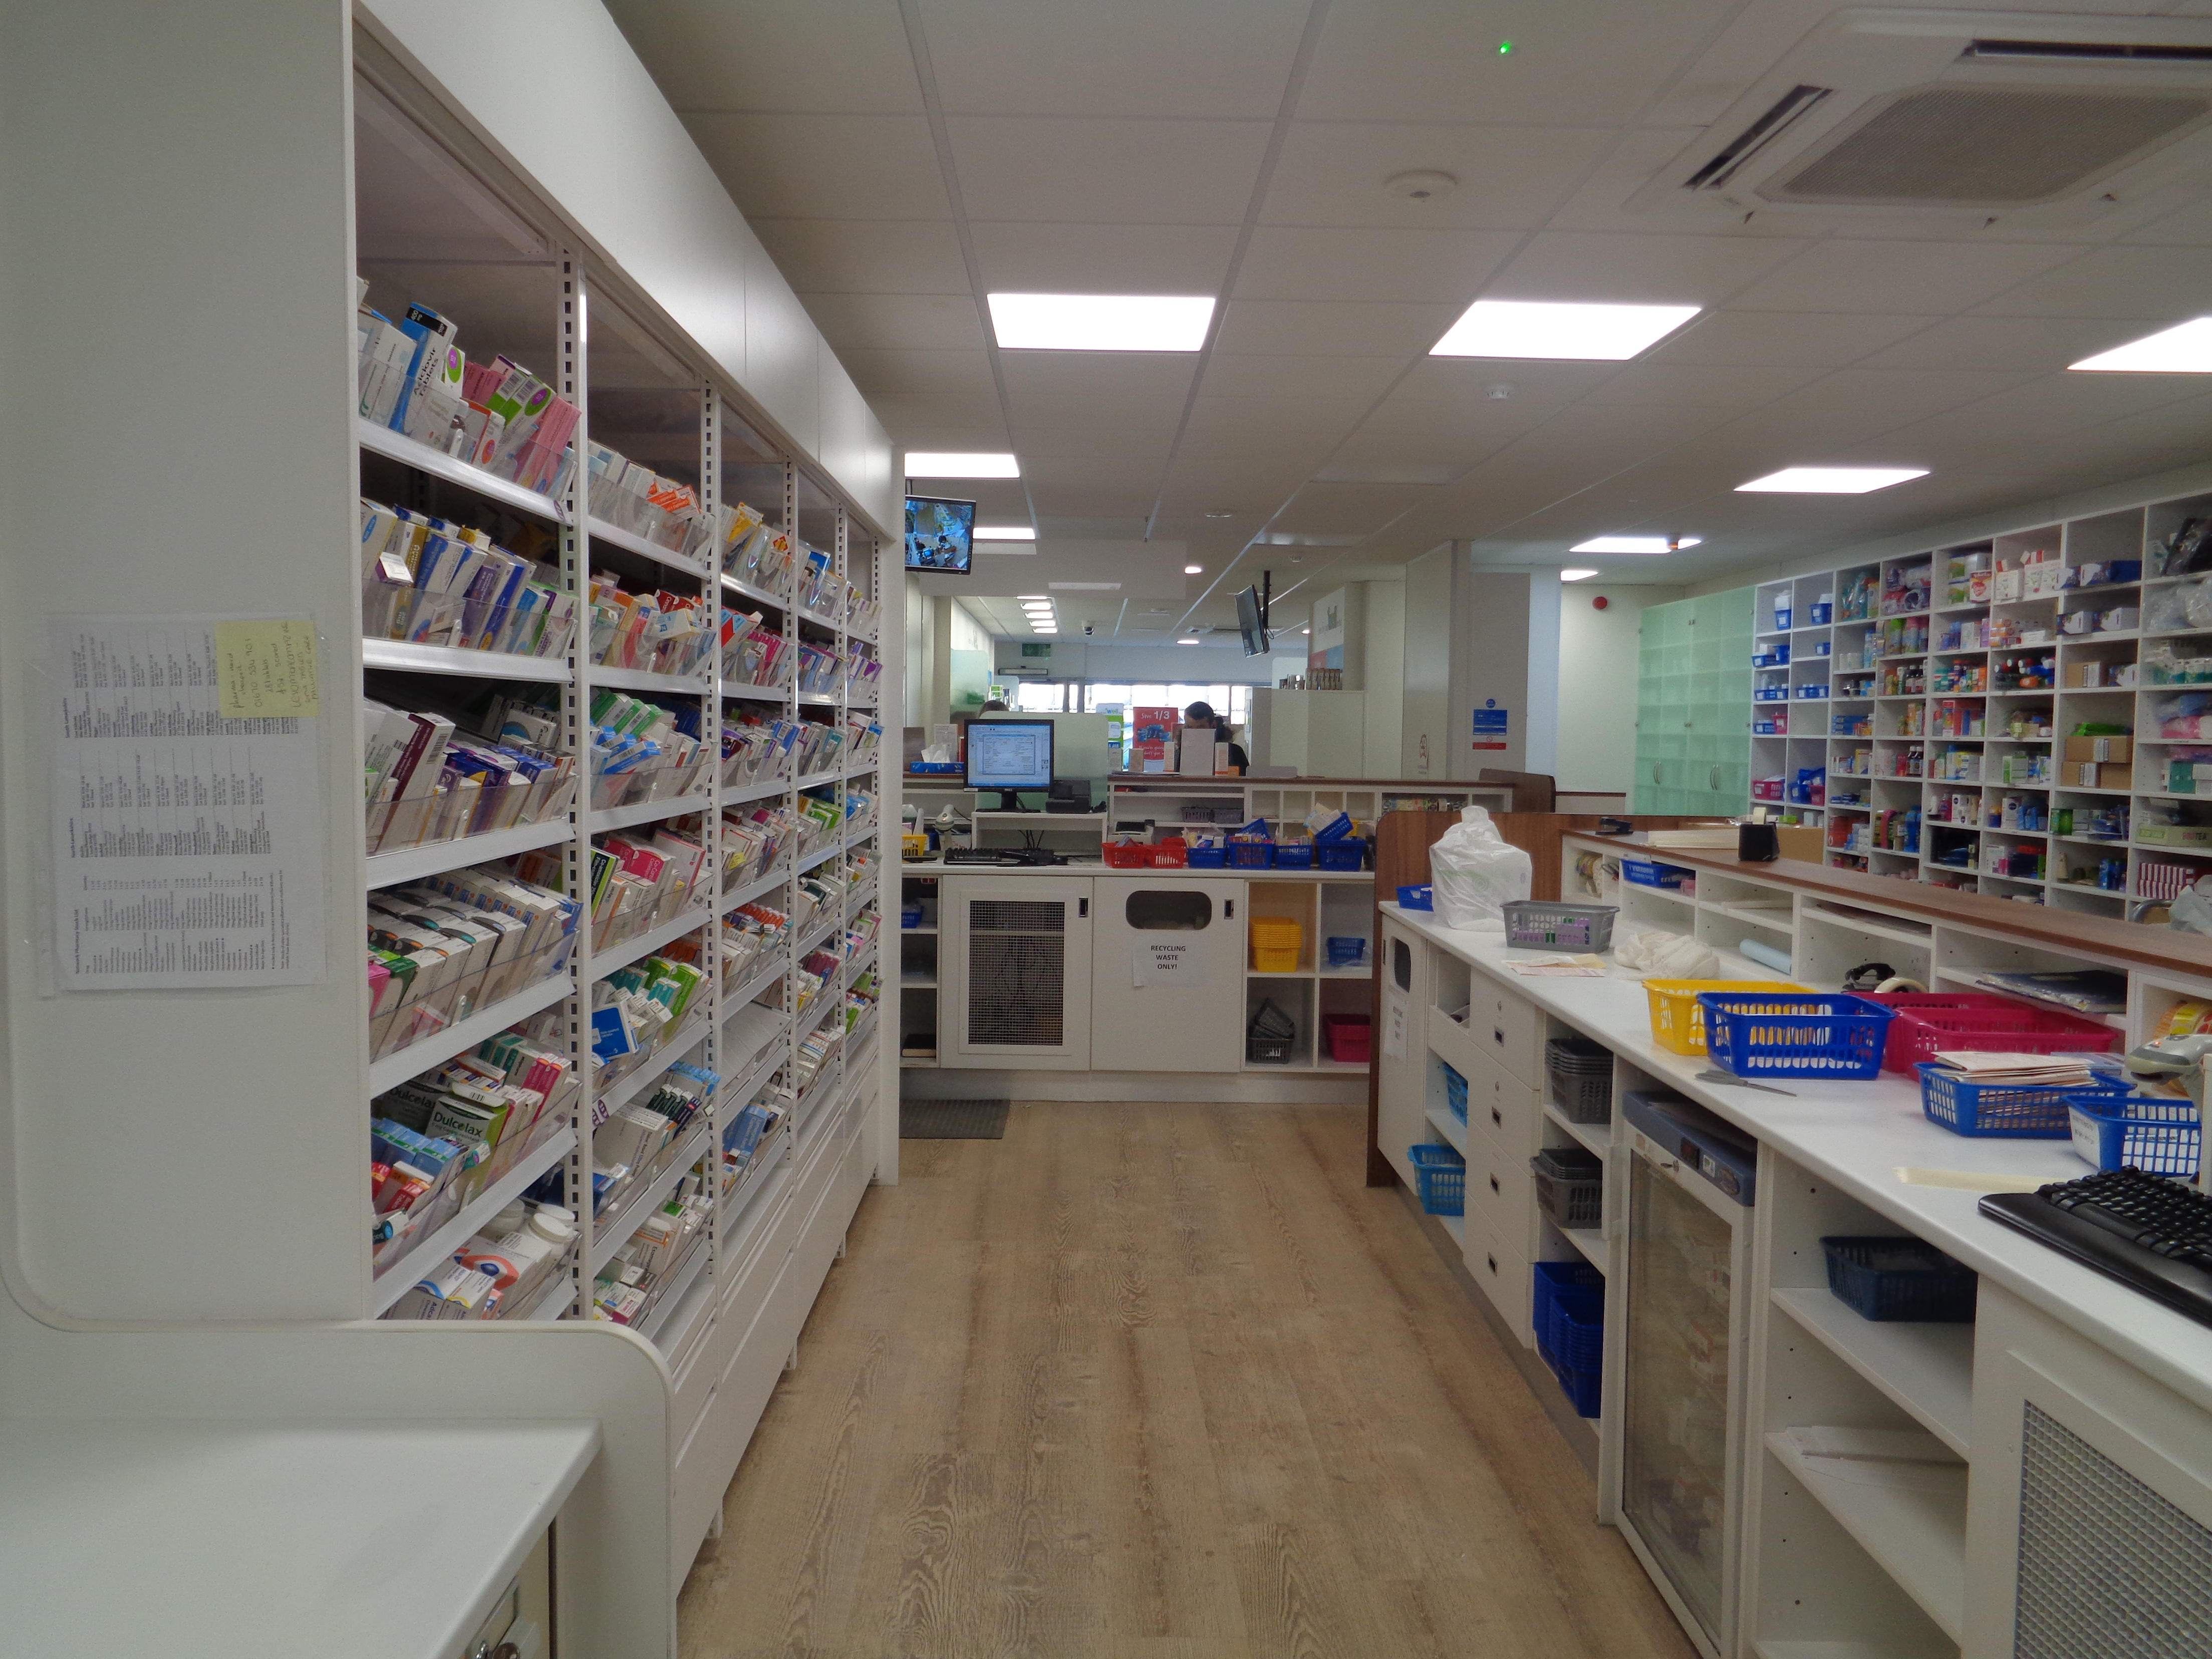 Images Well Pharmacy